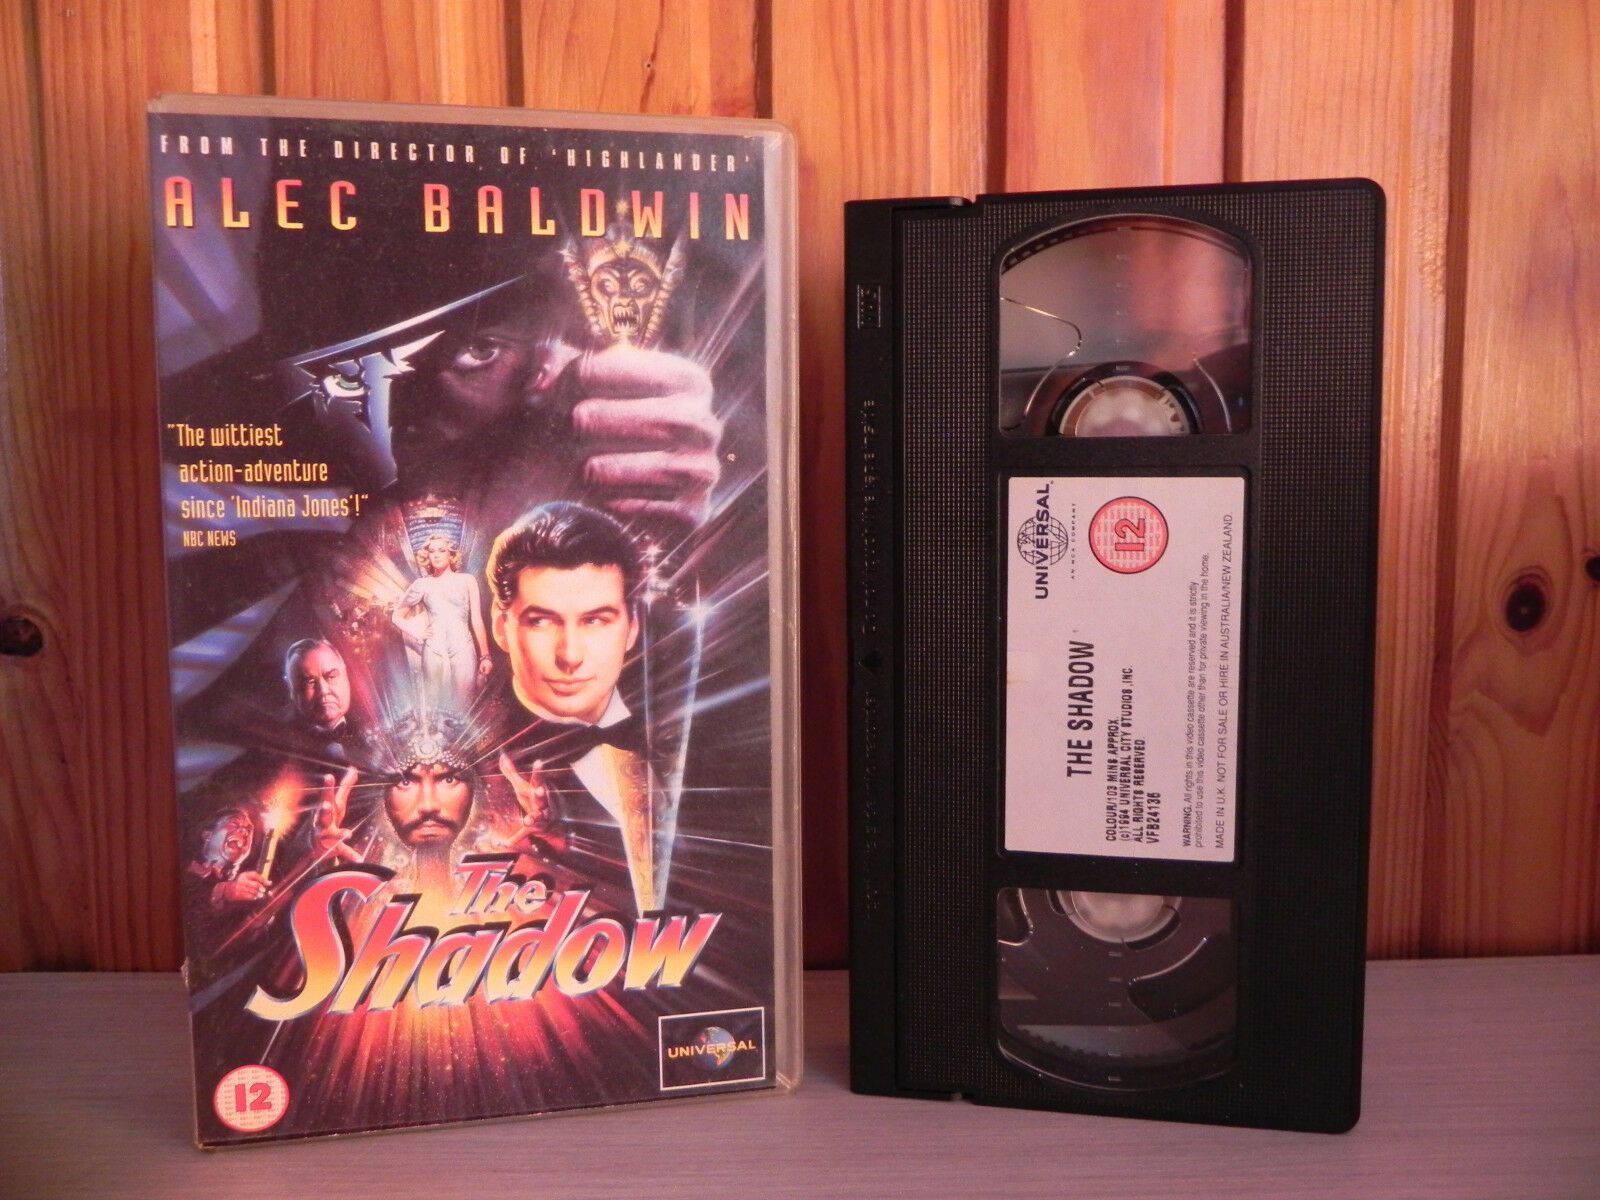 The Shadow - Alec Baldwin - The Glamour, The Mystery, The Danger - Universal VHS-